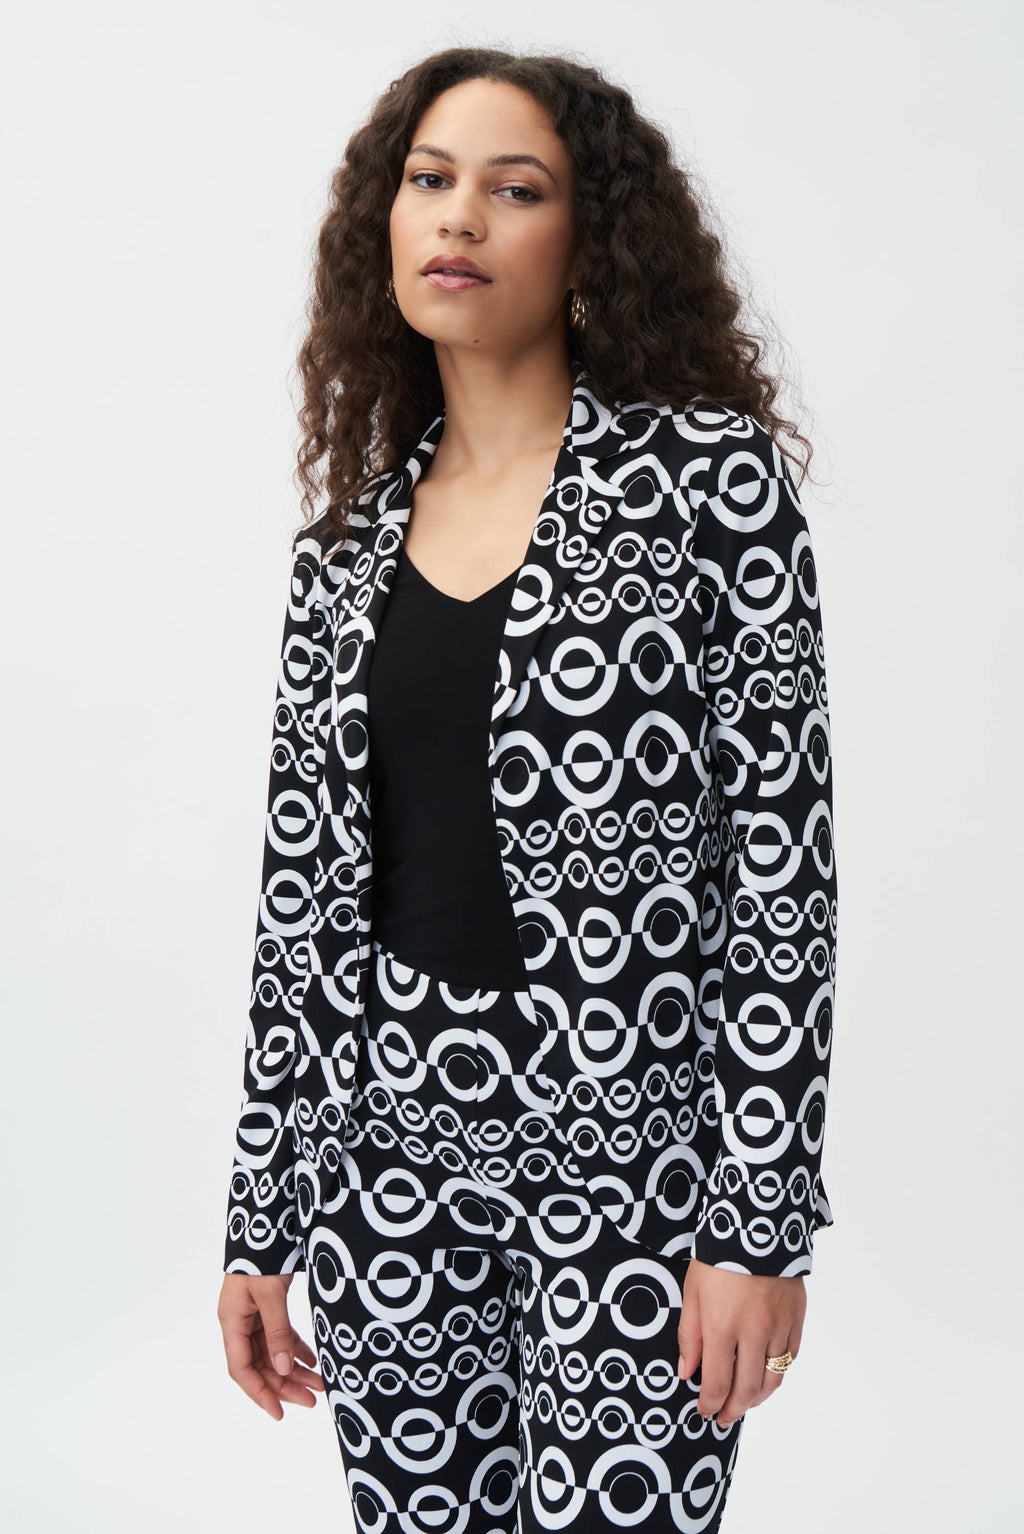 Striking a balance between relaxed and cosmopolitan, this geometric print blazer features a shawl collar and a flared style that's guaranteed to elevate your ensemble. Cut in a comfortable silky knit material, this chic blazer is defined by a notched collar and long straight sleeves. Whether you're meeting friends for brunch or heading to the office, this blazer is sure to make a statement.